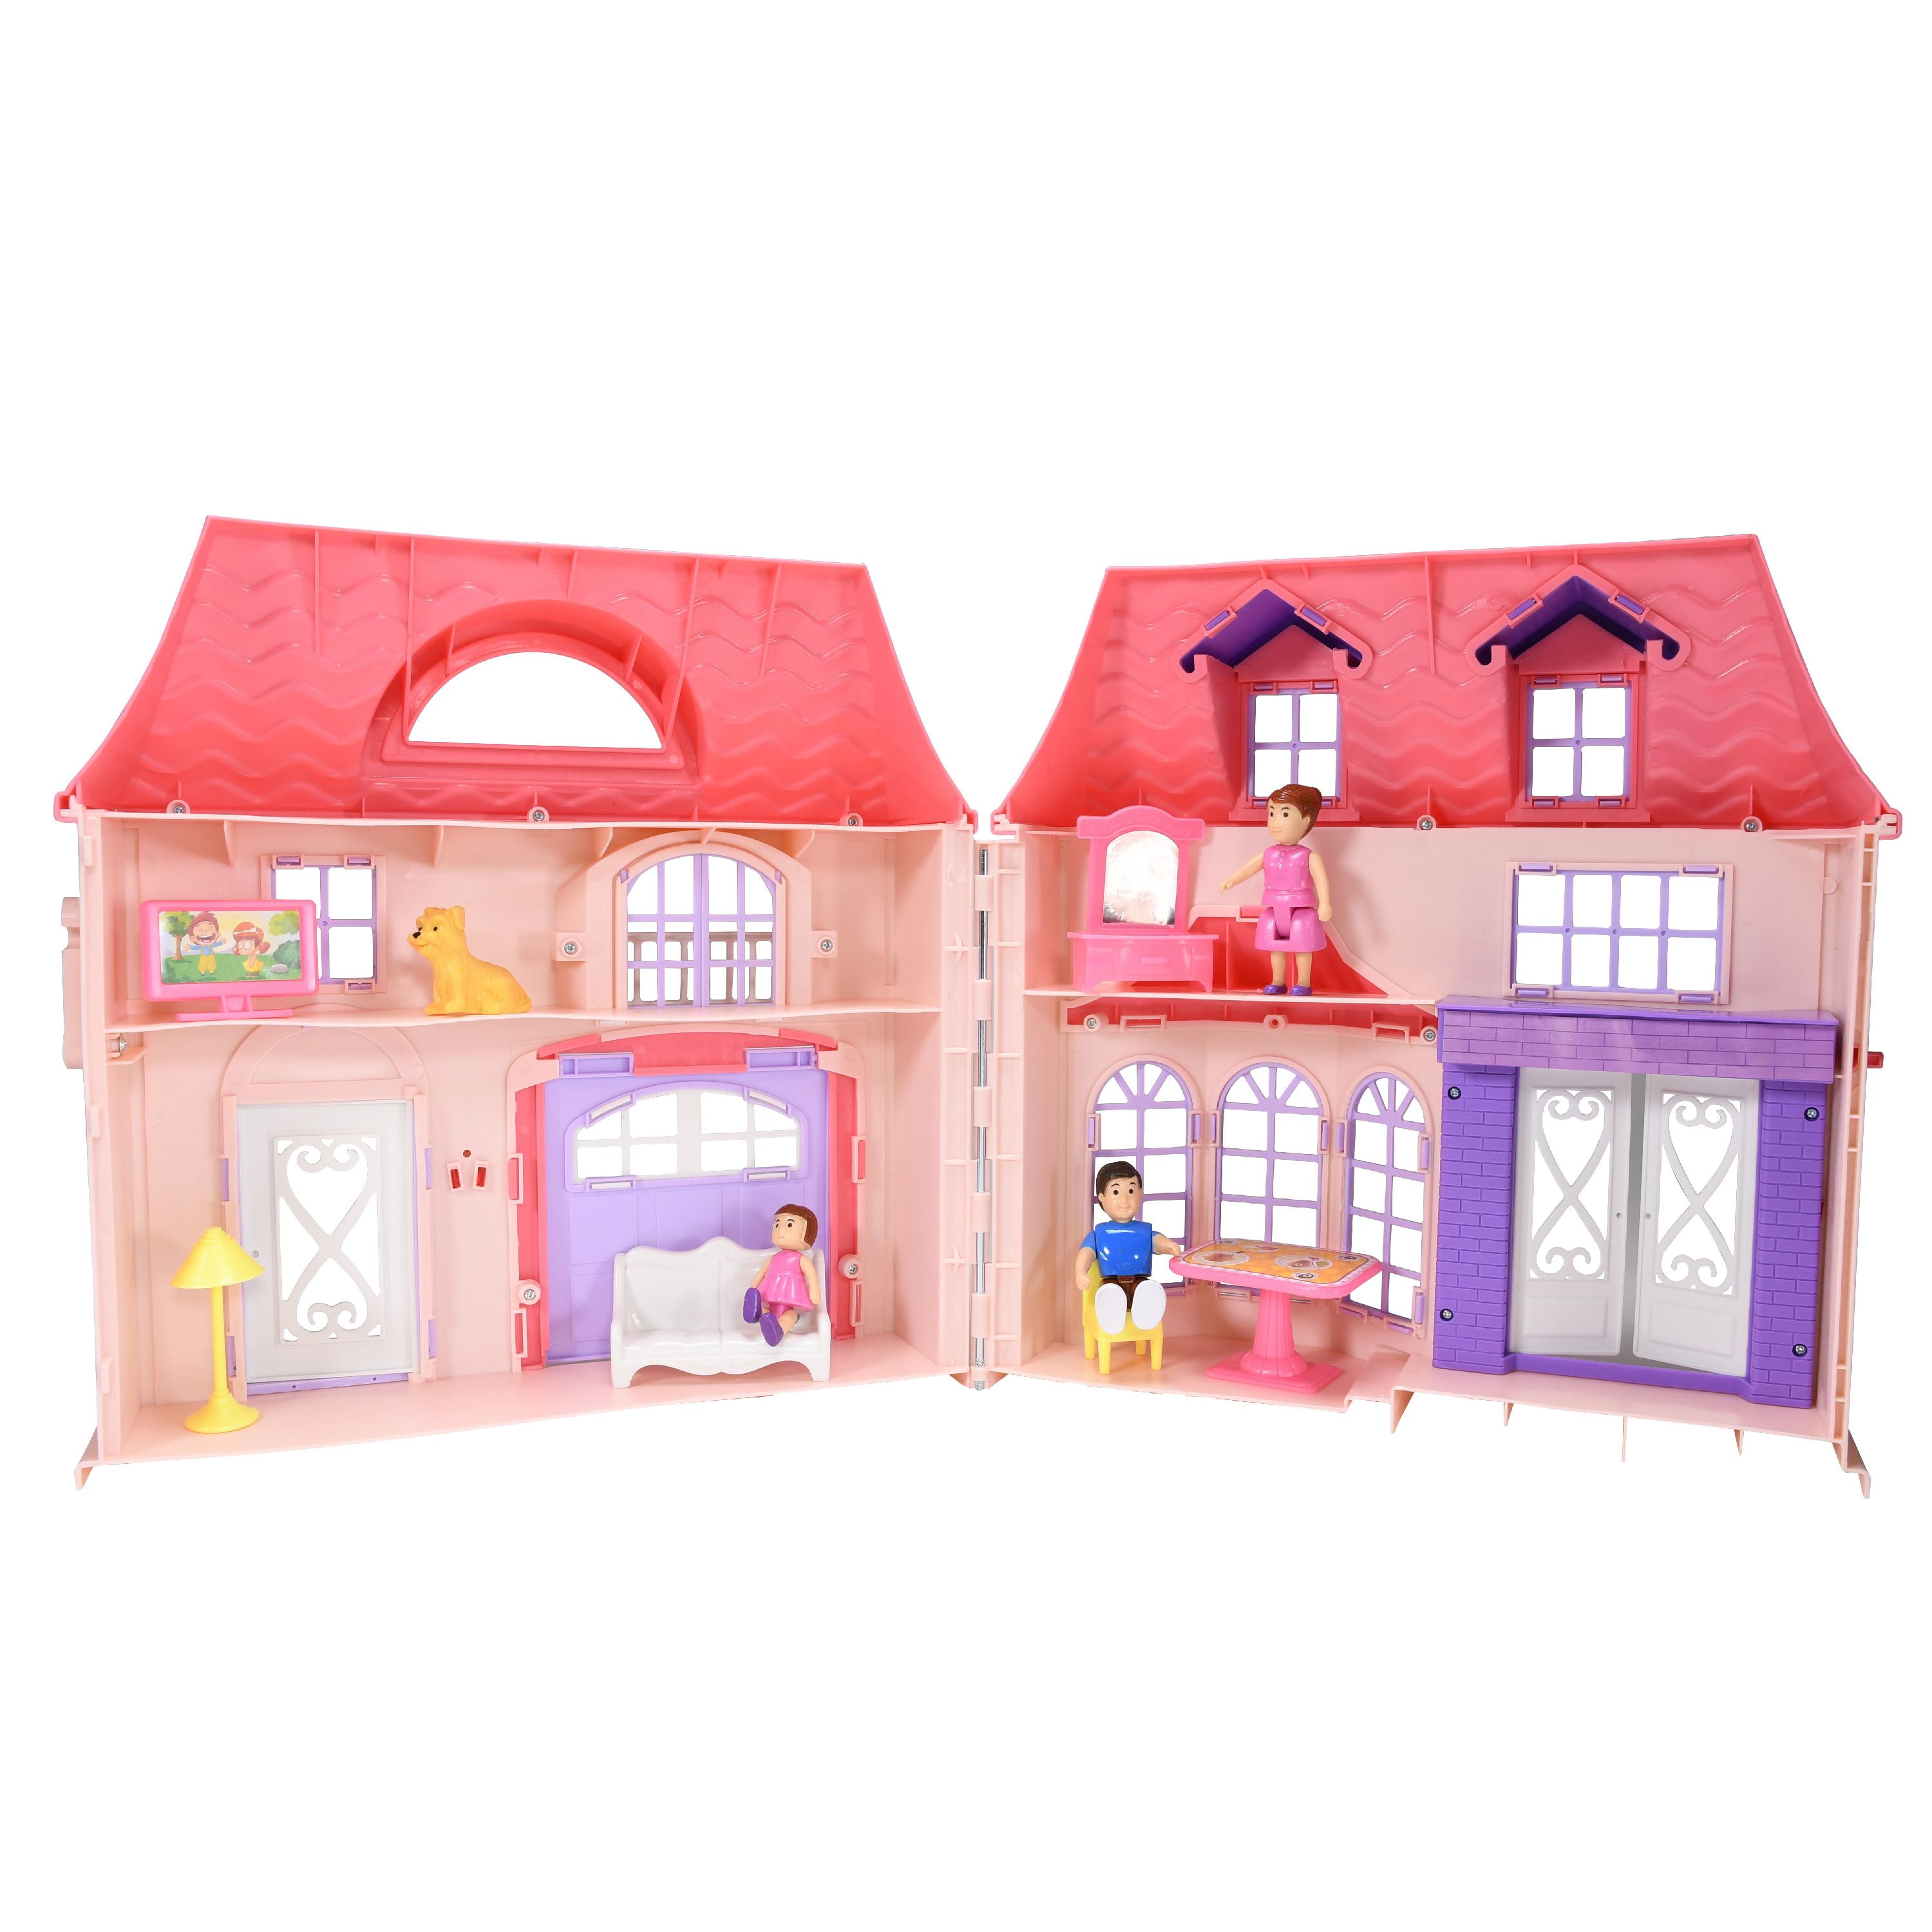 Boley Pretend Play Collapsible Dollhouse with 21 Play Pieces